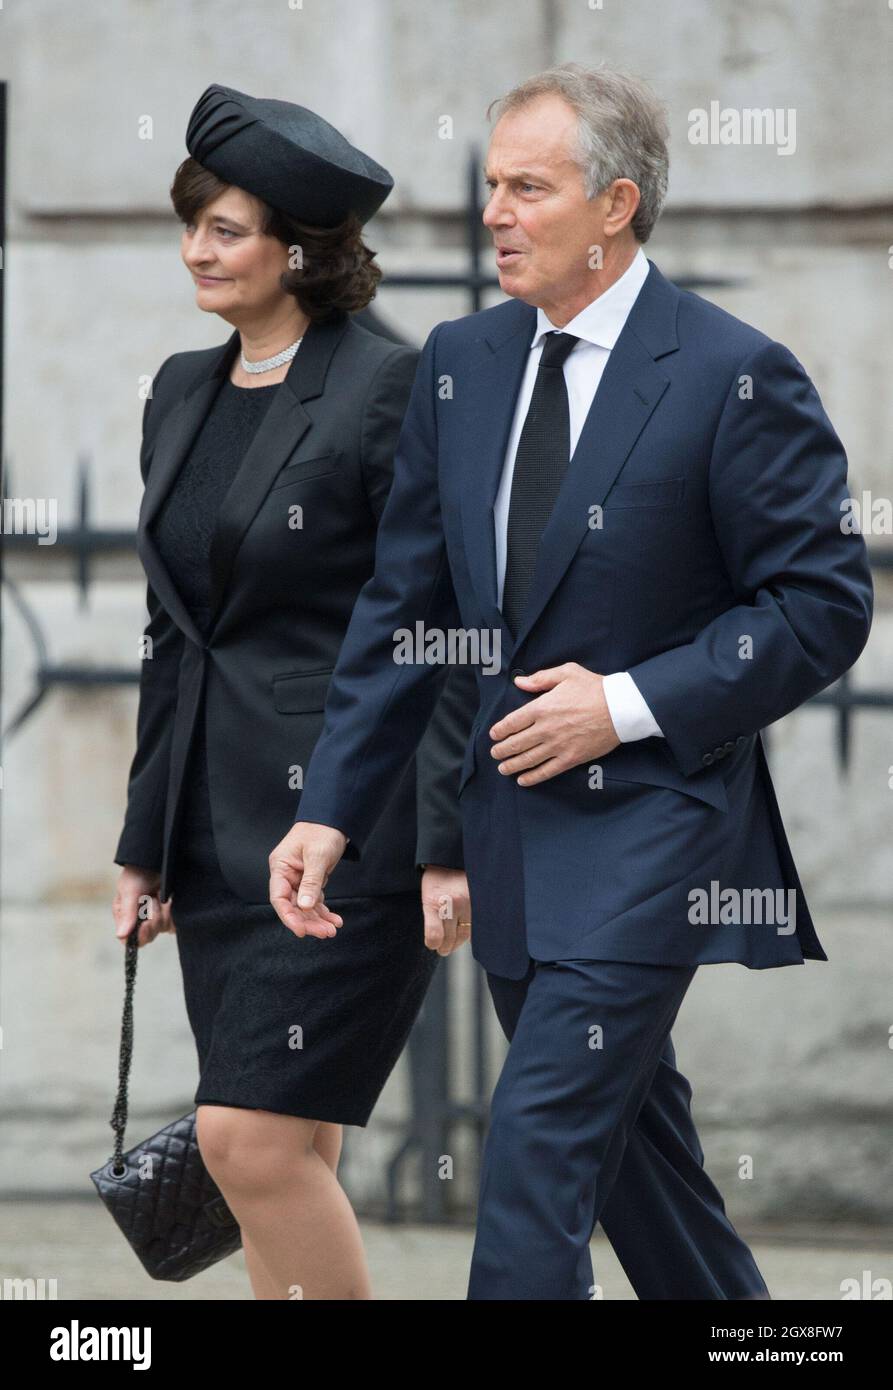 Former Prime Minister Tony Blair his wife Cherie Blair arrive for the funeral of Margaret Thatcher at St. Paul's Cathedral in London on April 17, 2013.  Stock Photo